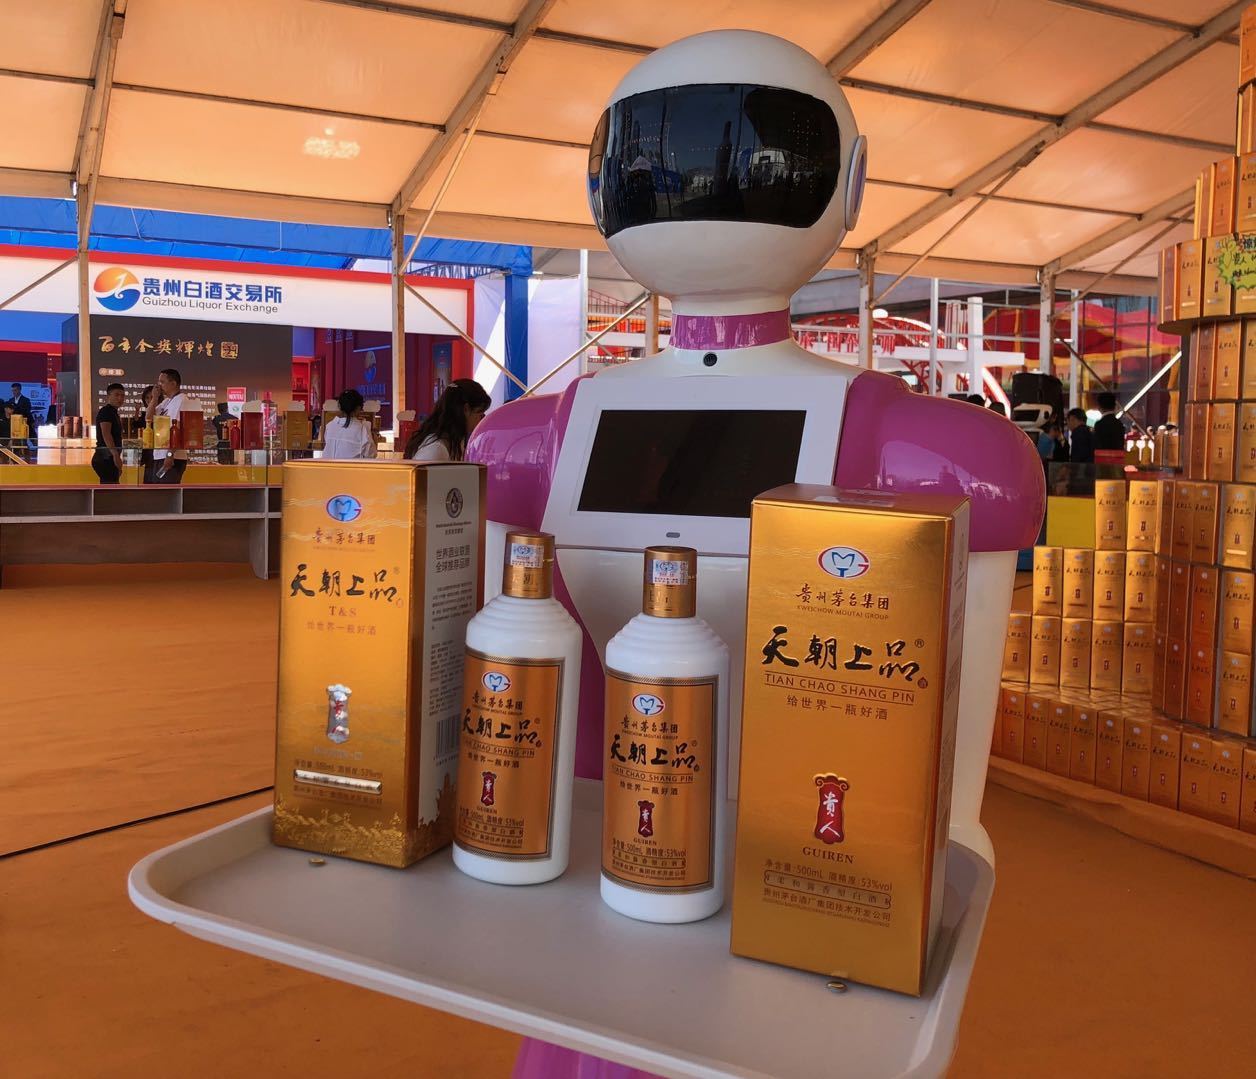 International beverages expo opens in Guiyang